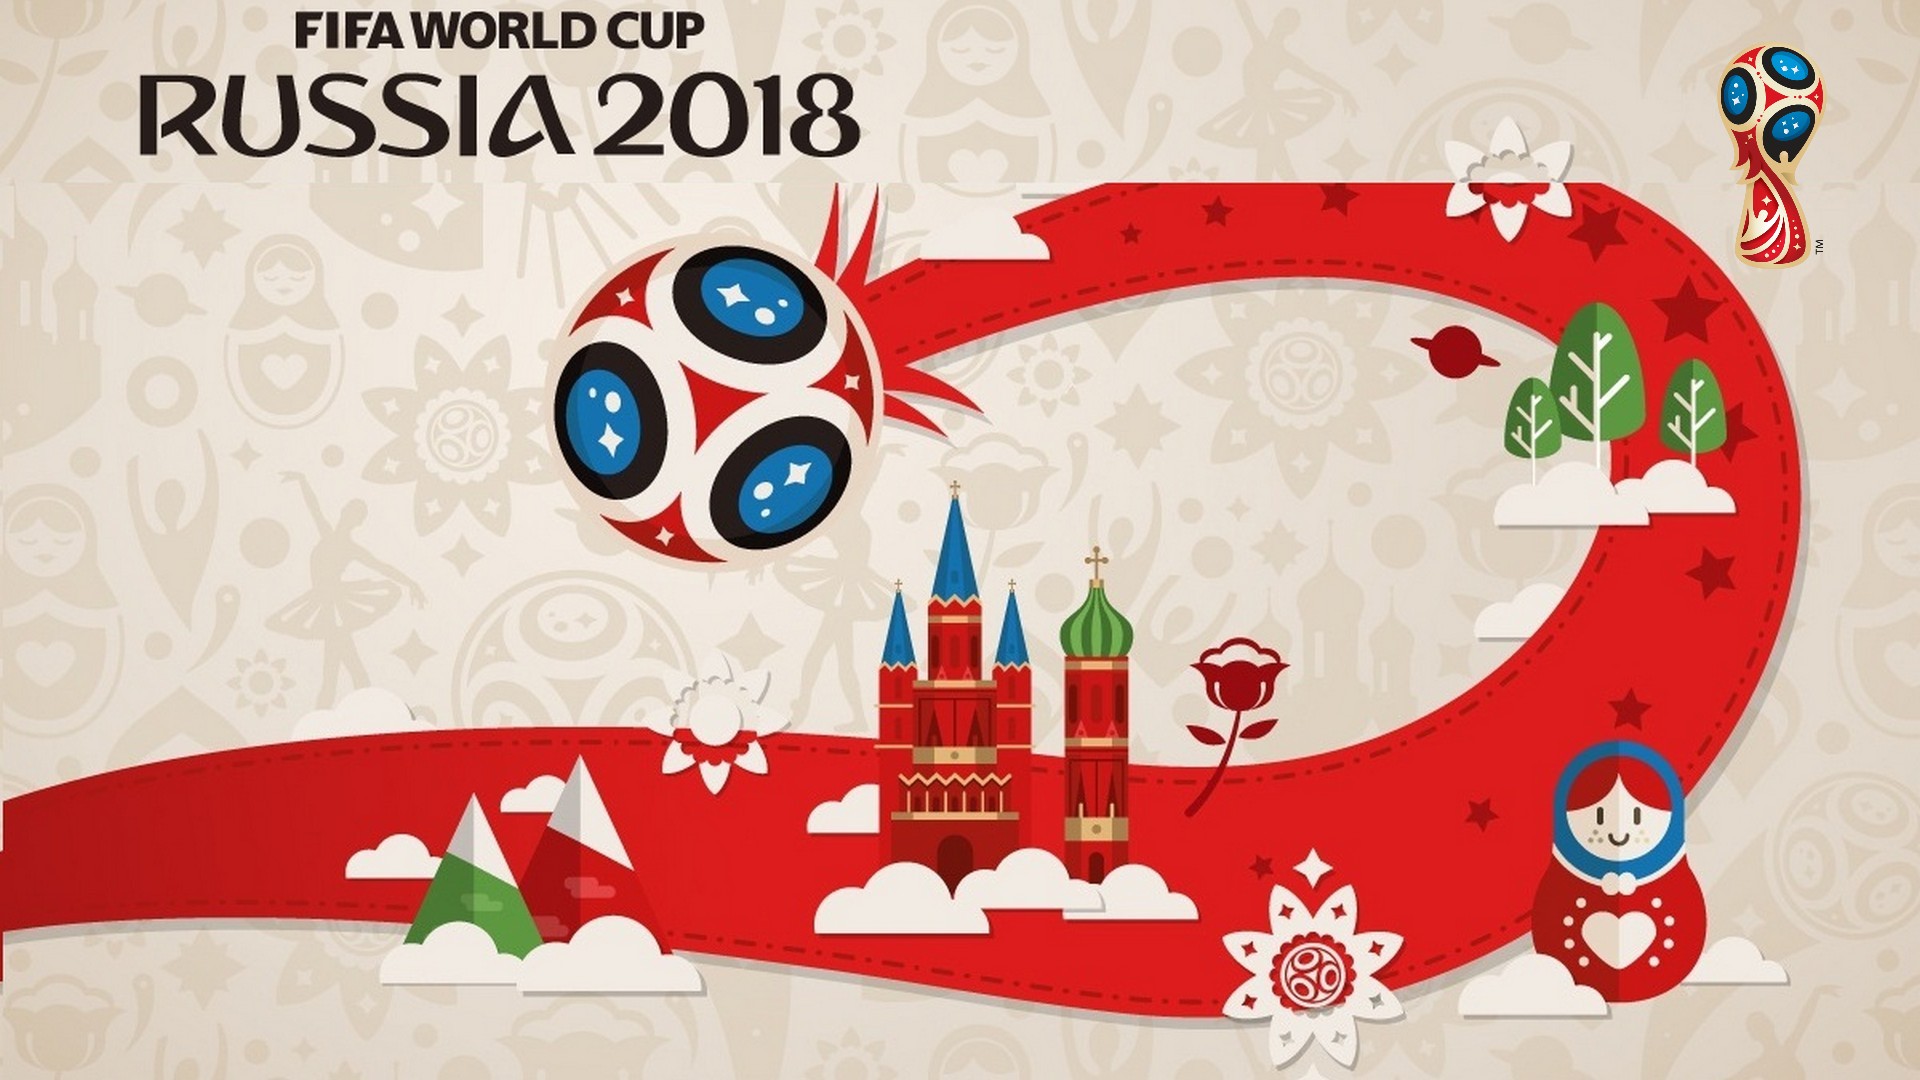 FIFA World Cup Wallpaper HD With Resolution 1920X1080 pixel. You can make this wallpaper for your Mac or Windows Desktop Background, iPhone, Android or Tablet and another Smartphone device for free